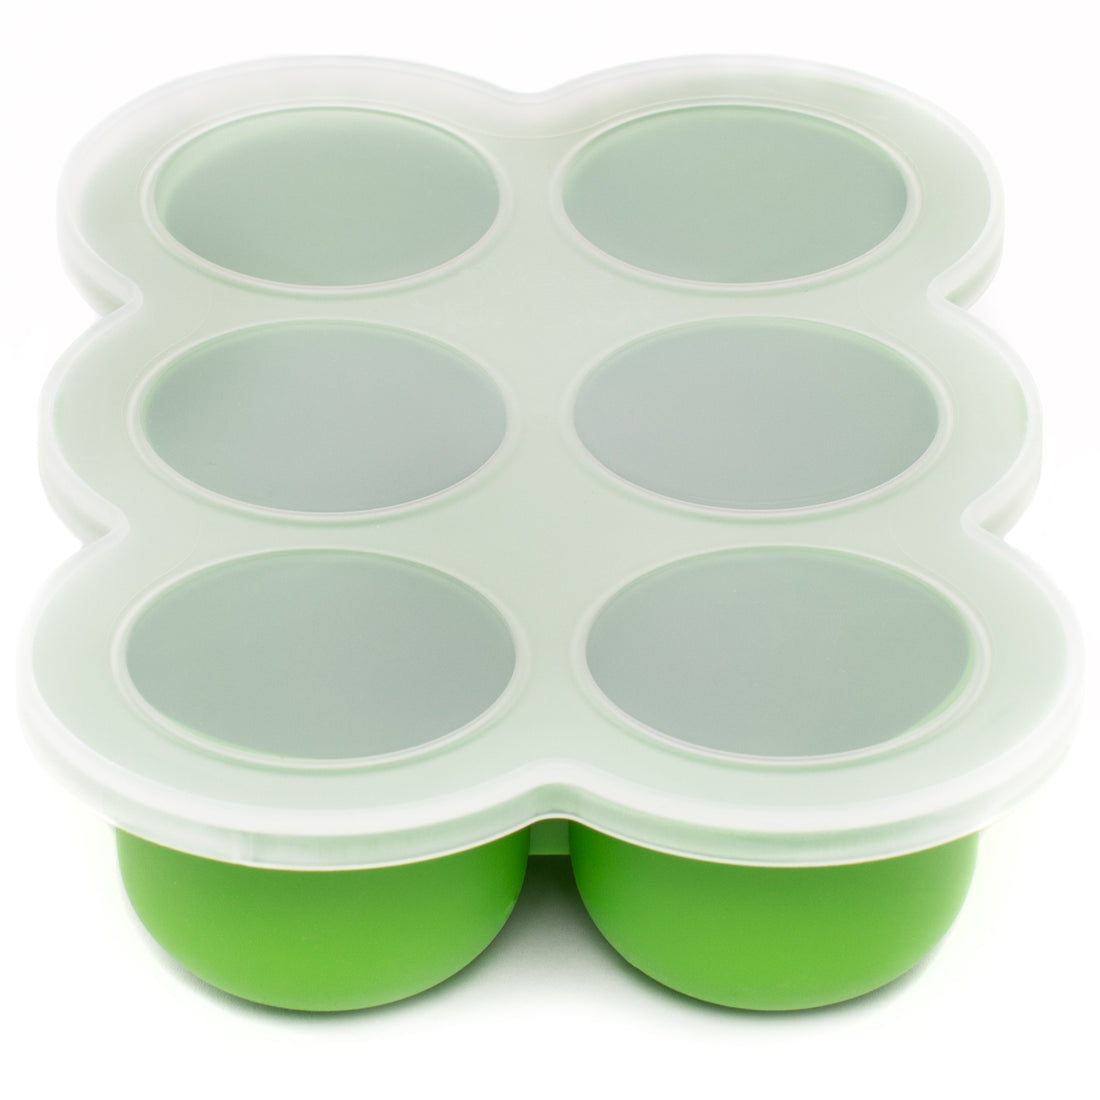 Silicone Freezer Tray, One-Cup Size